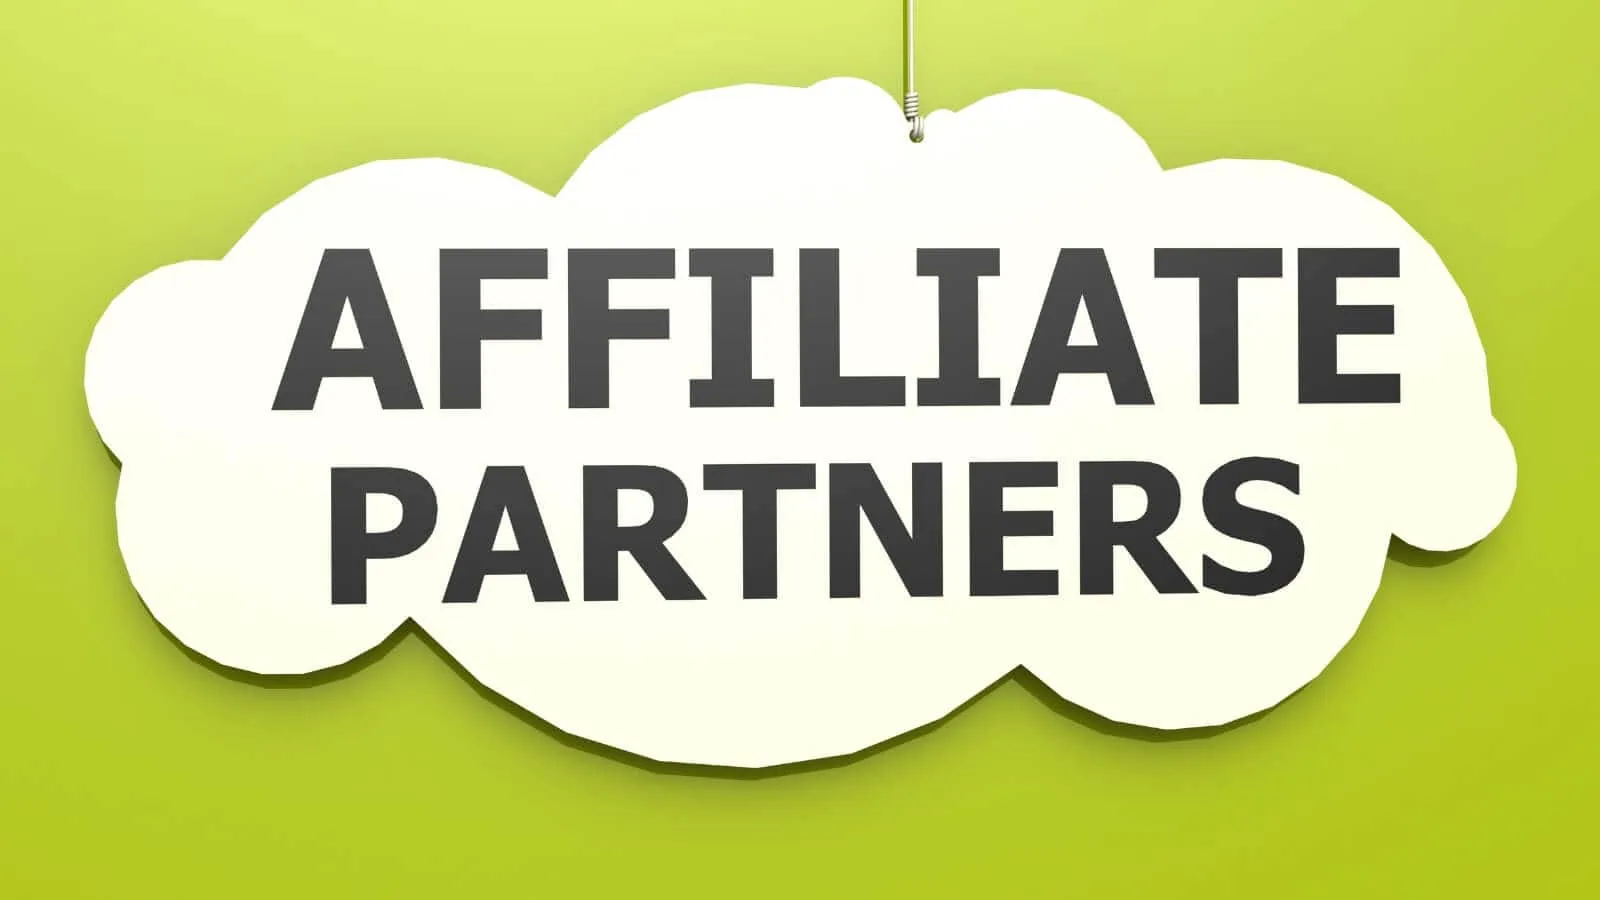 What is affiliate partners